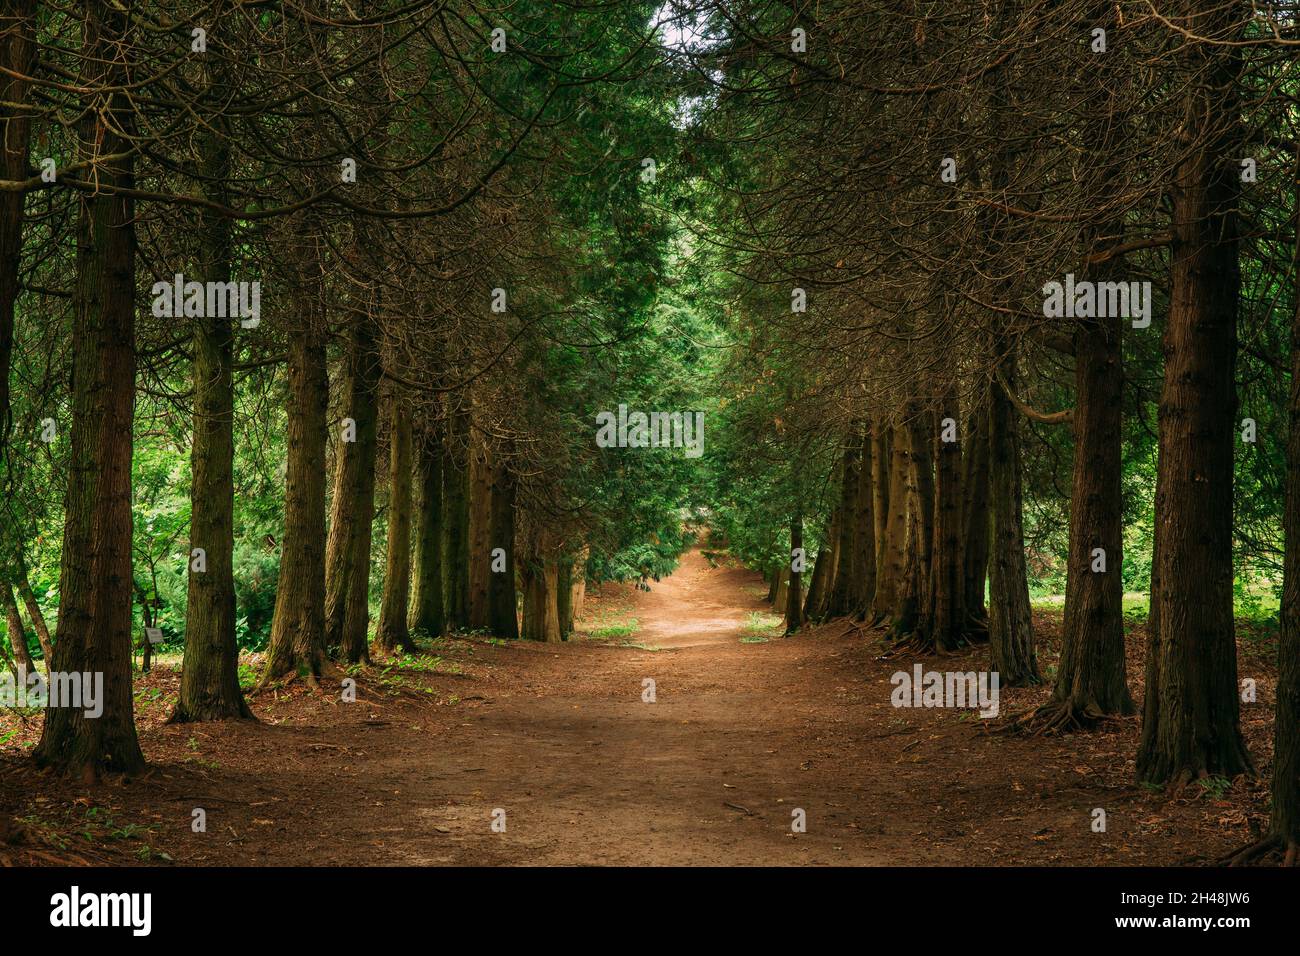 Walkway Lane Path Through Green Thuja Coniferous Trees In Forest Stock Photo